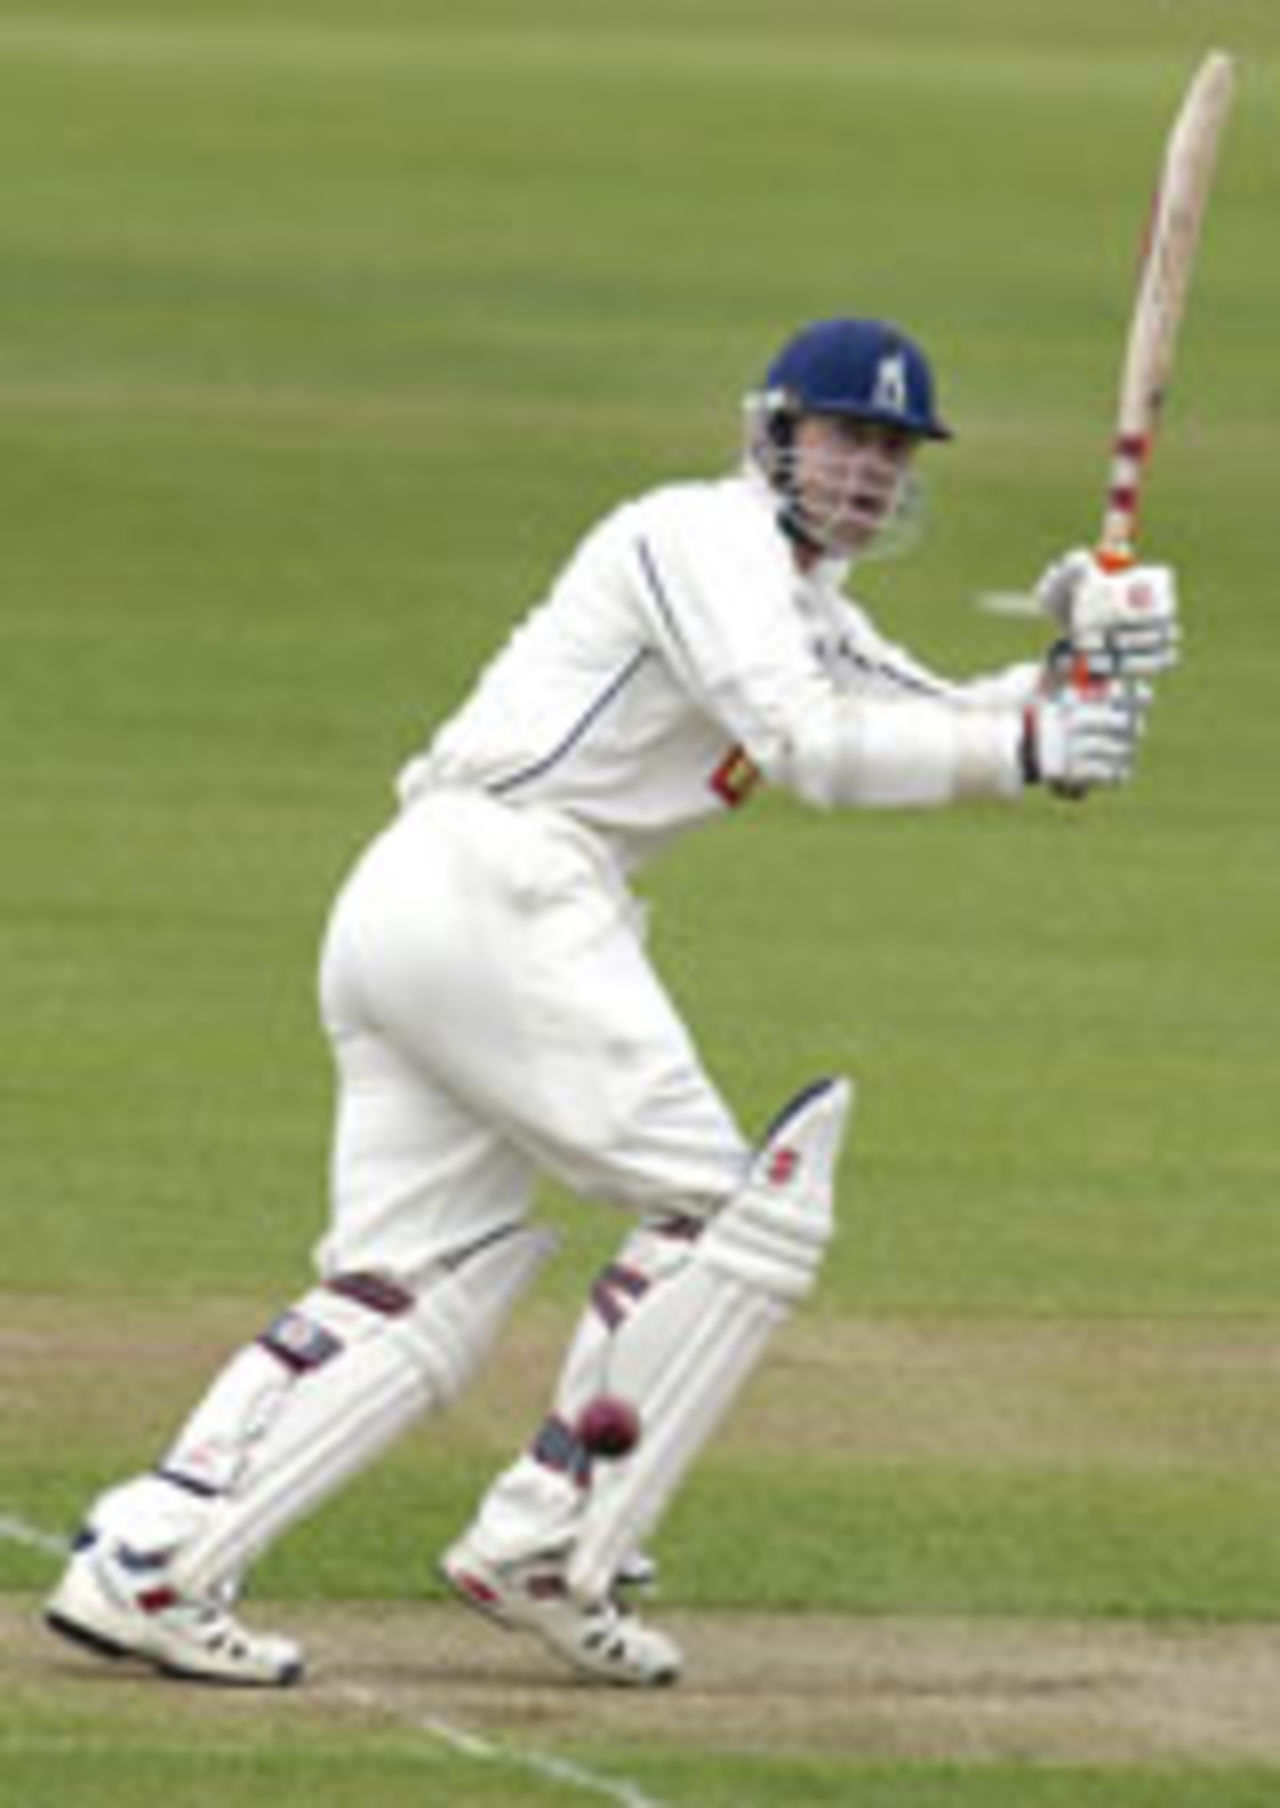 Nick Knight batting in the C&G quarter-final against Gloucestershire, June 11 2003